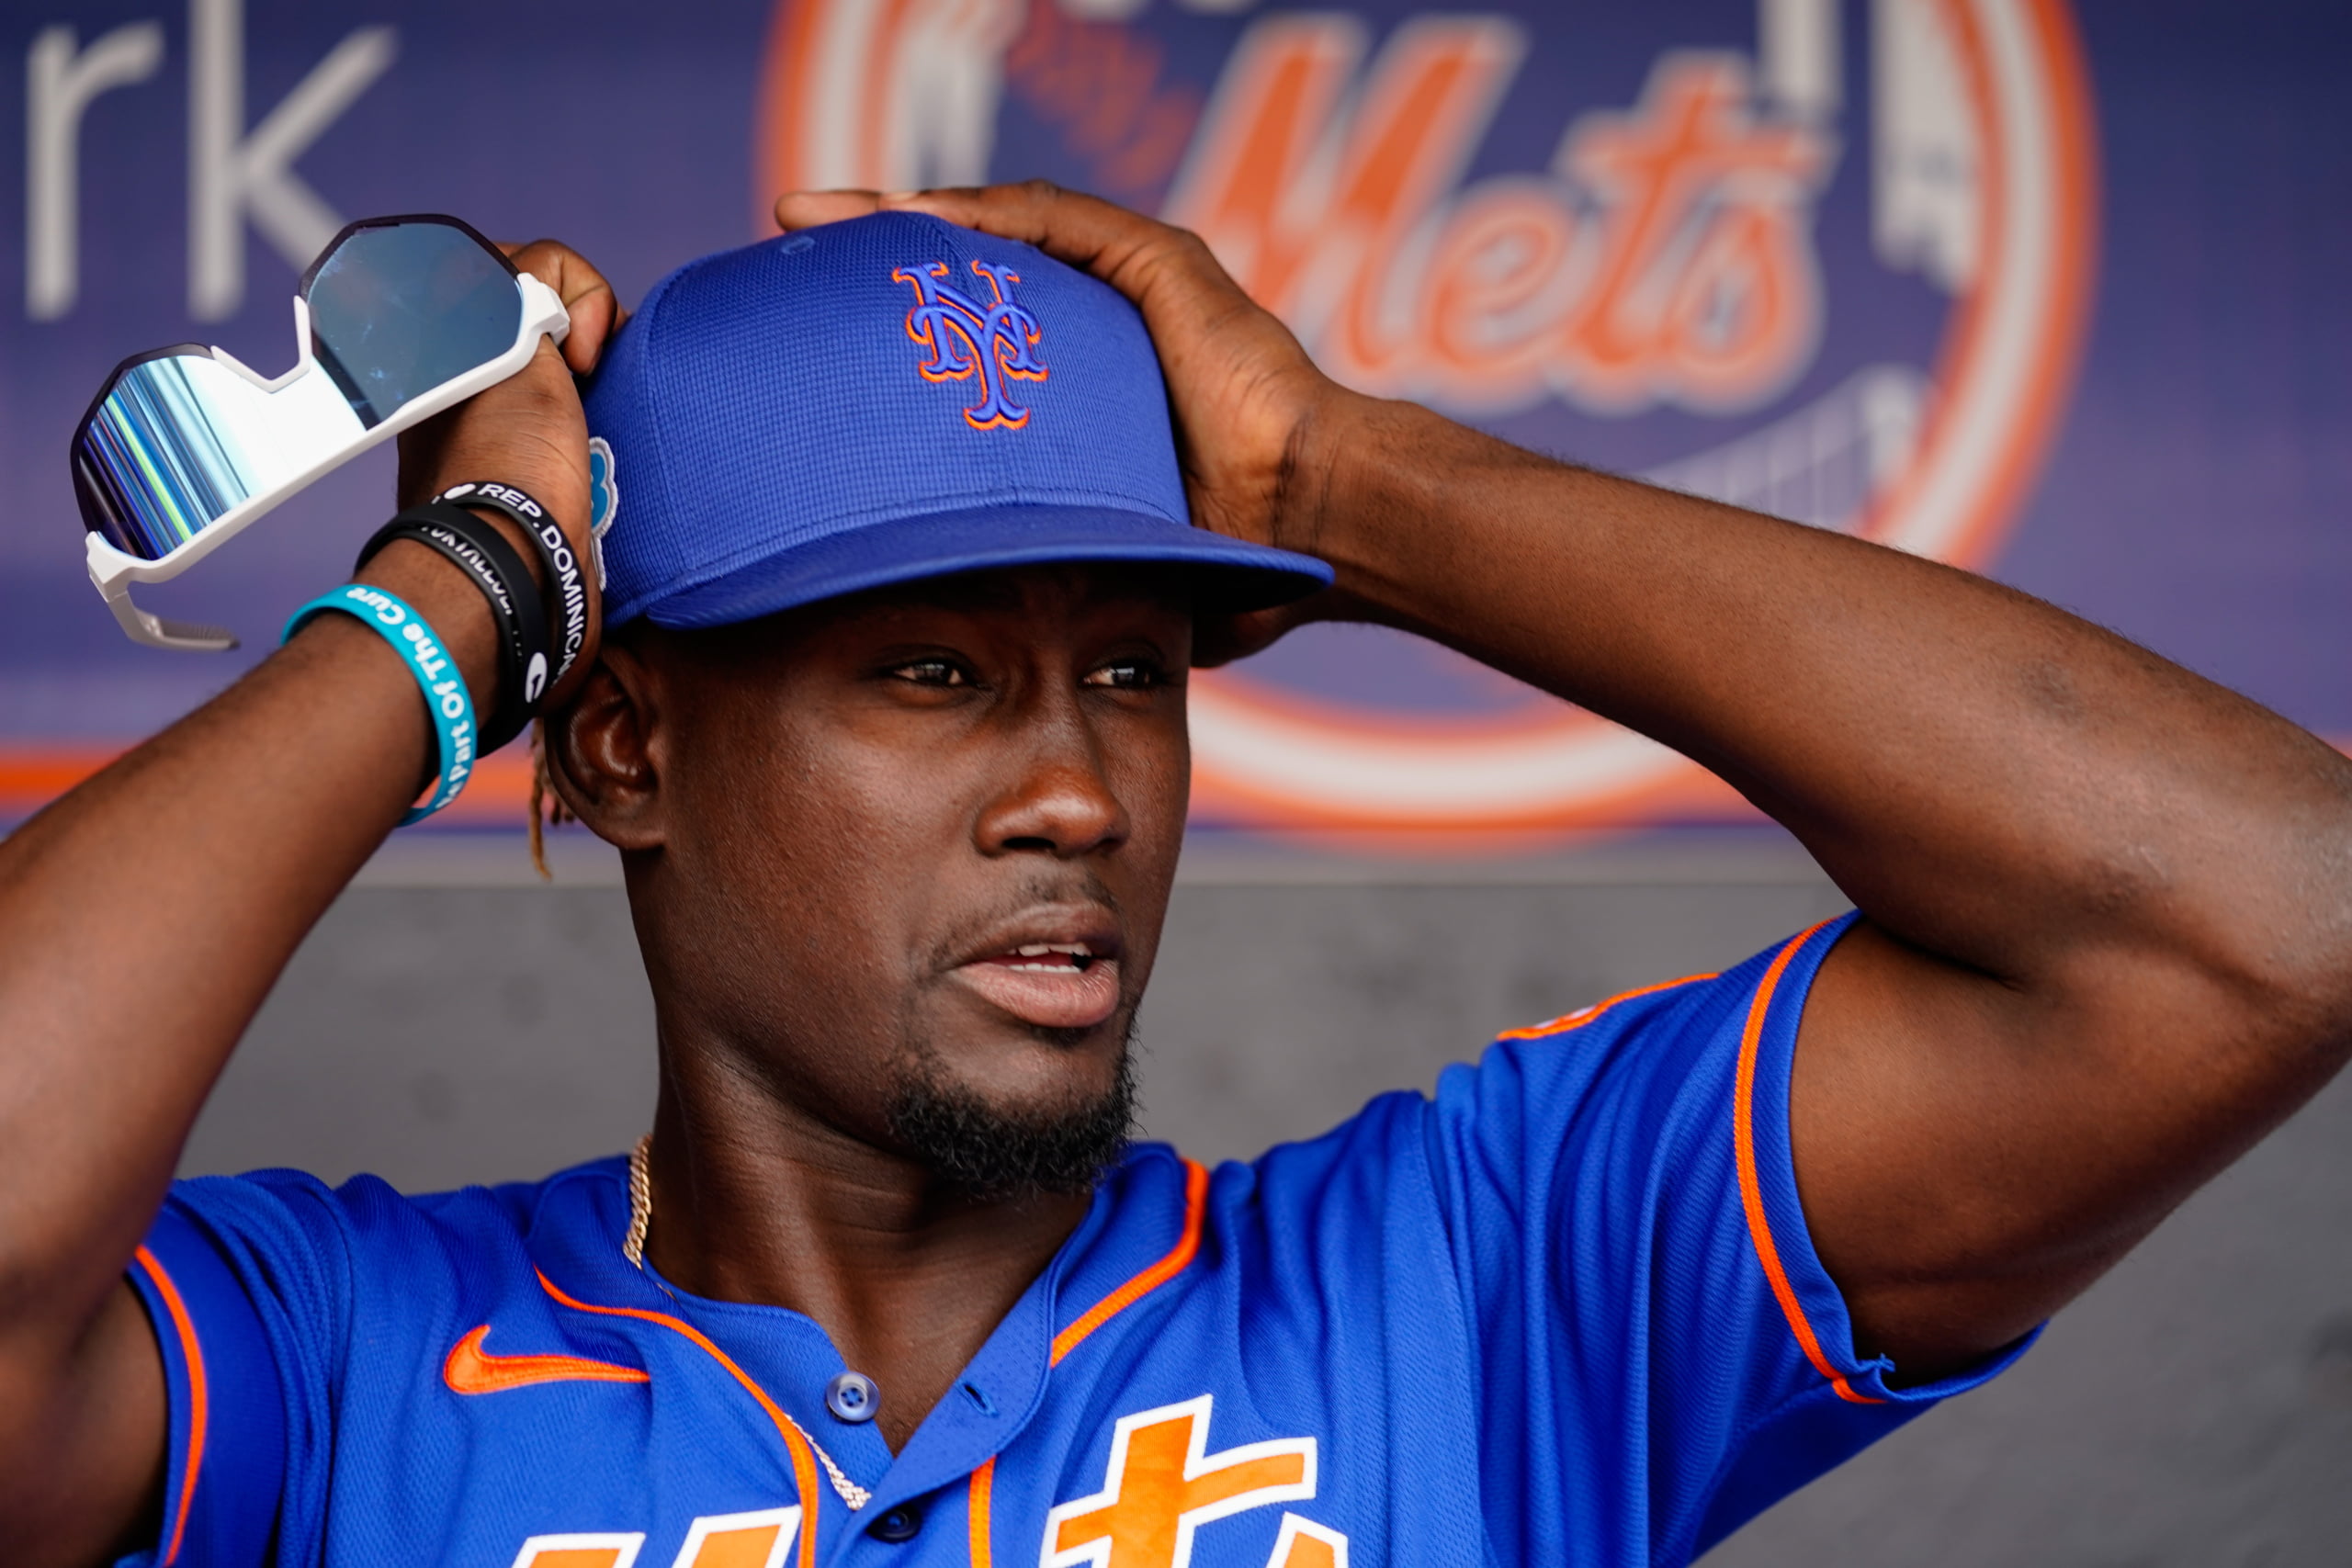 Struggling Mets call up infielder Vientos from minor leagues